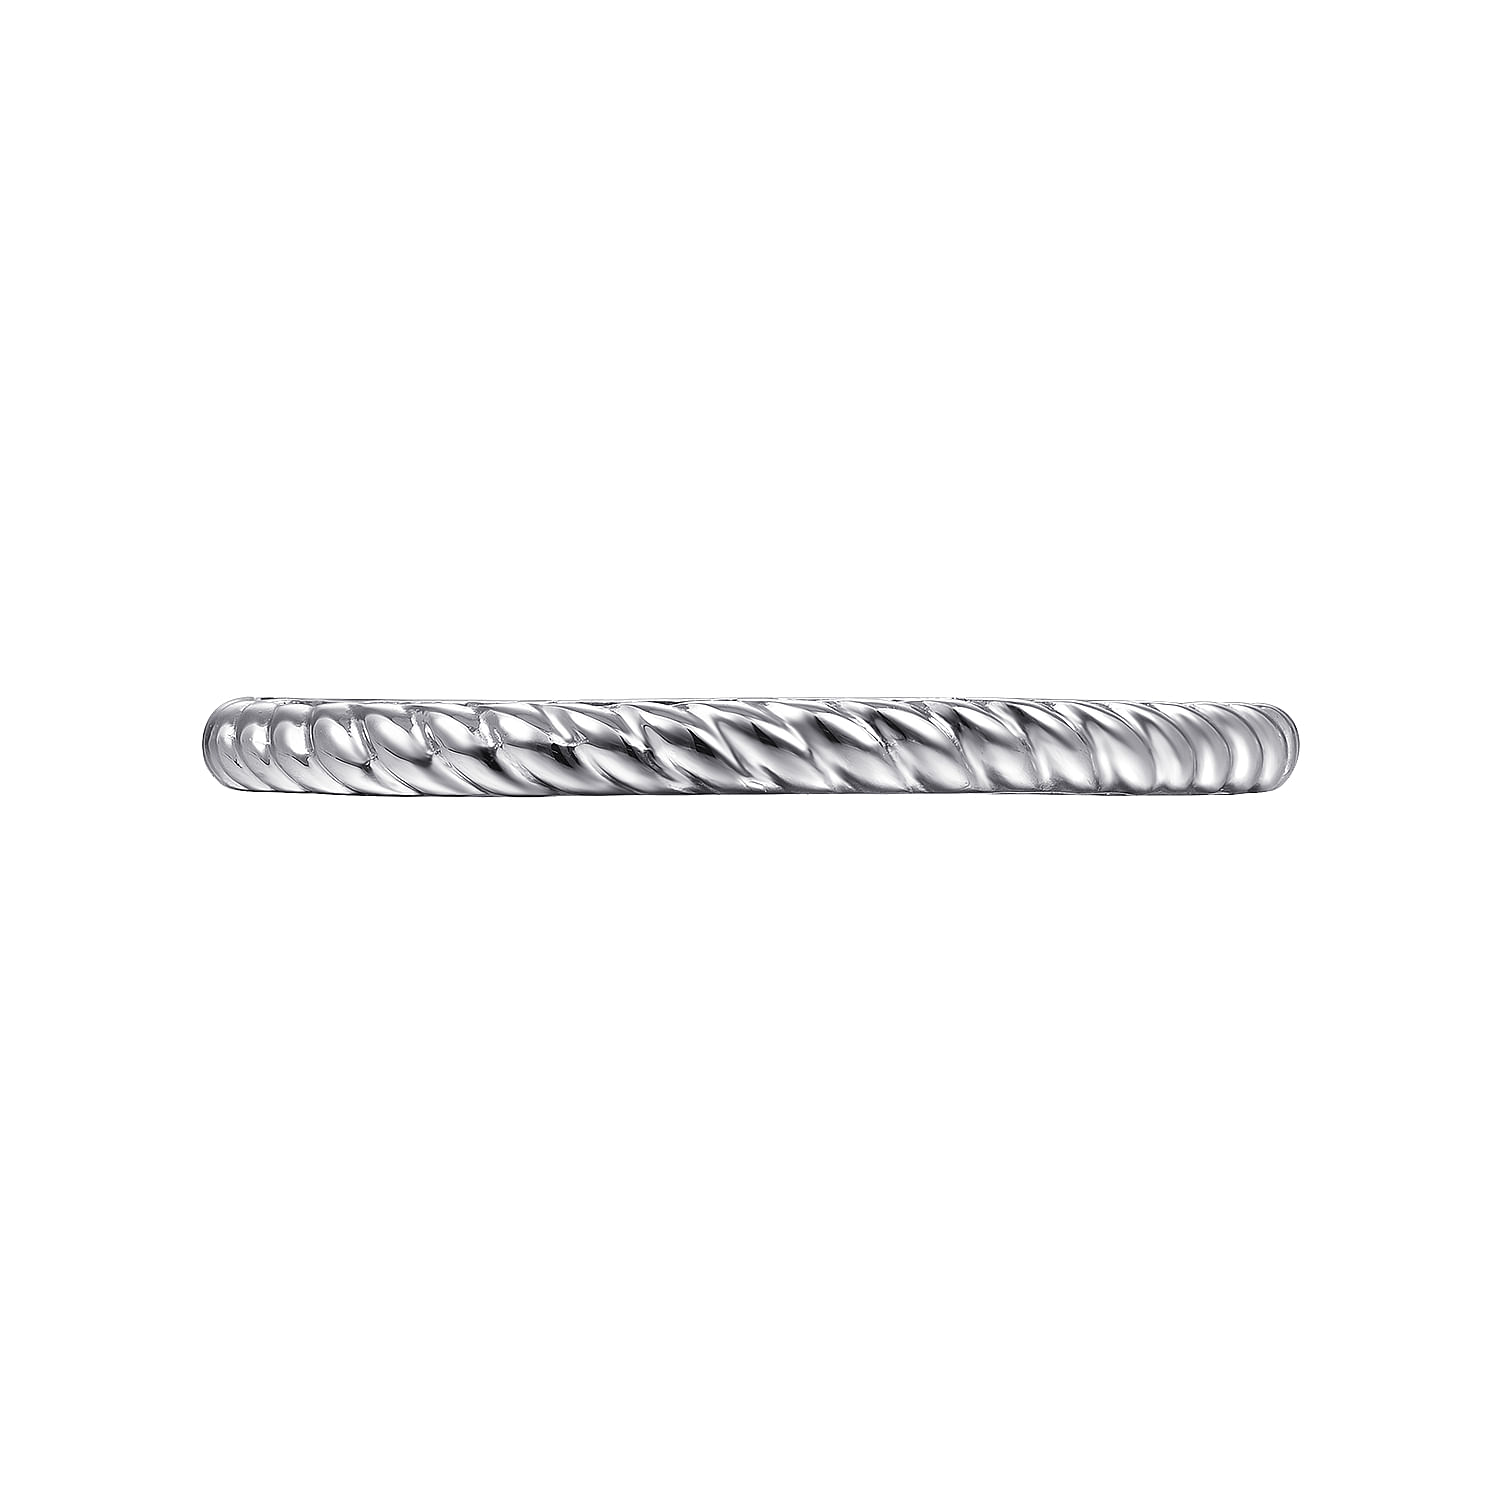 14K White Gold Twisted Rope Stackable Ring